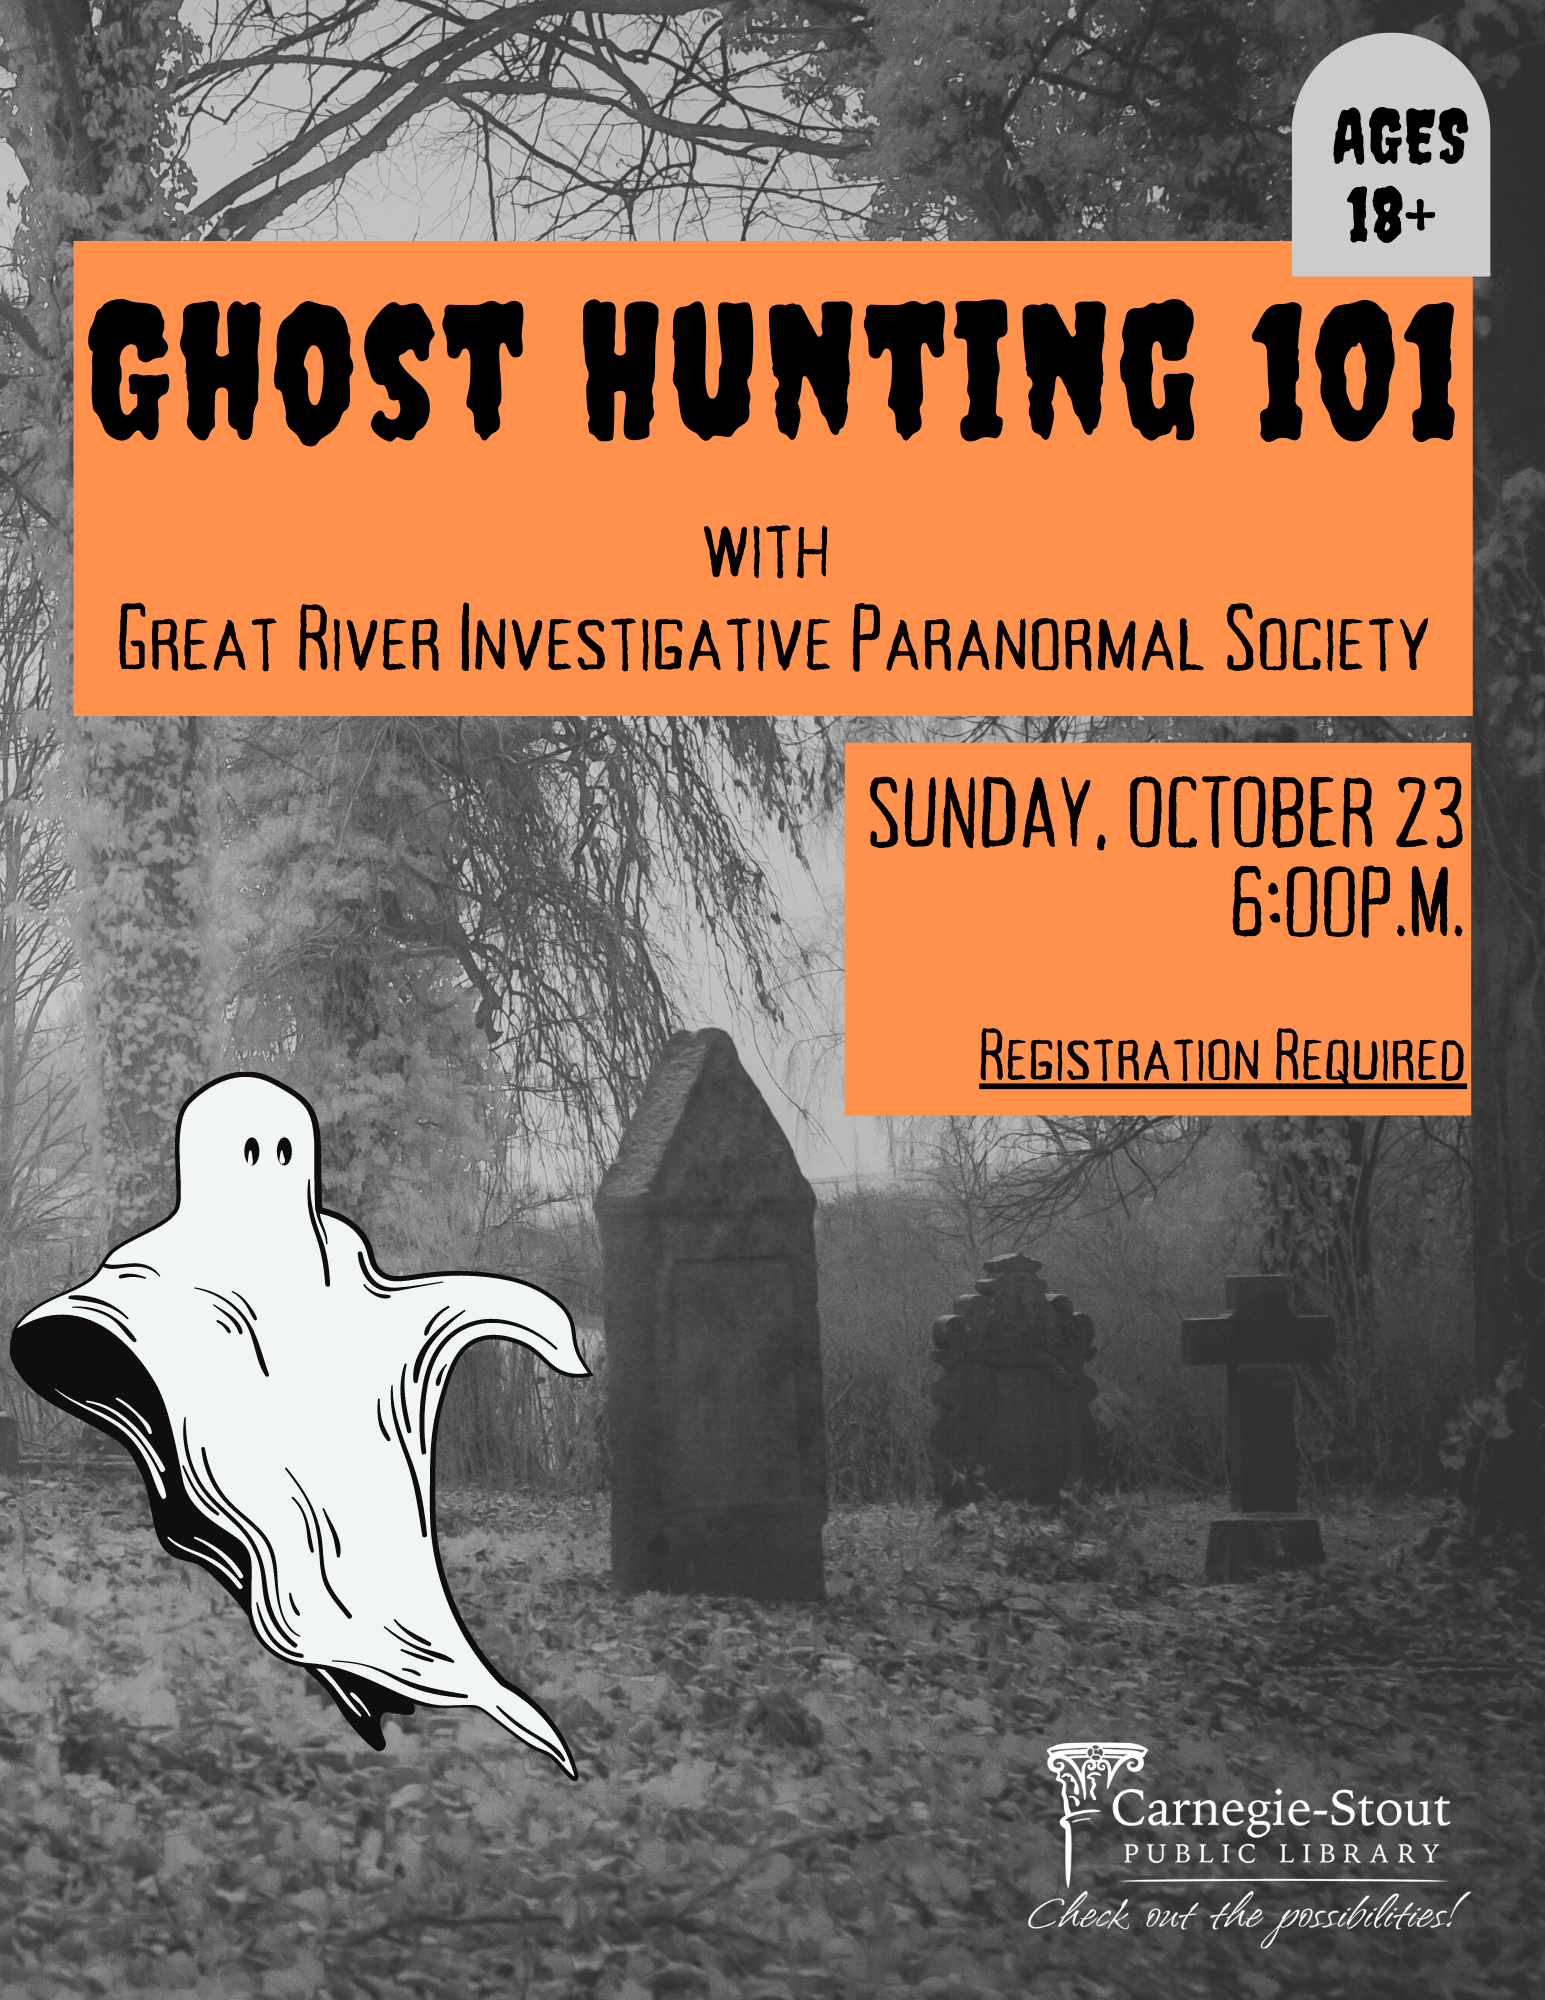 Ghost Hunting 101 flyer with a black and white cemetery photo as the background